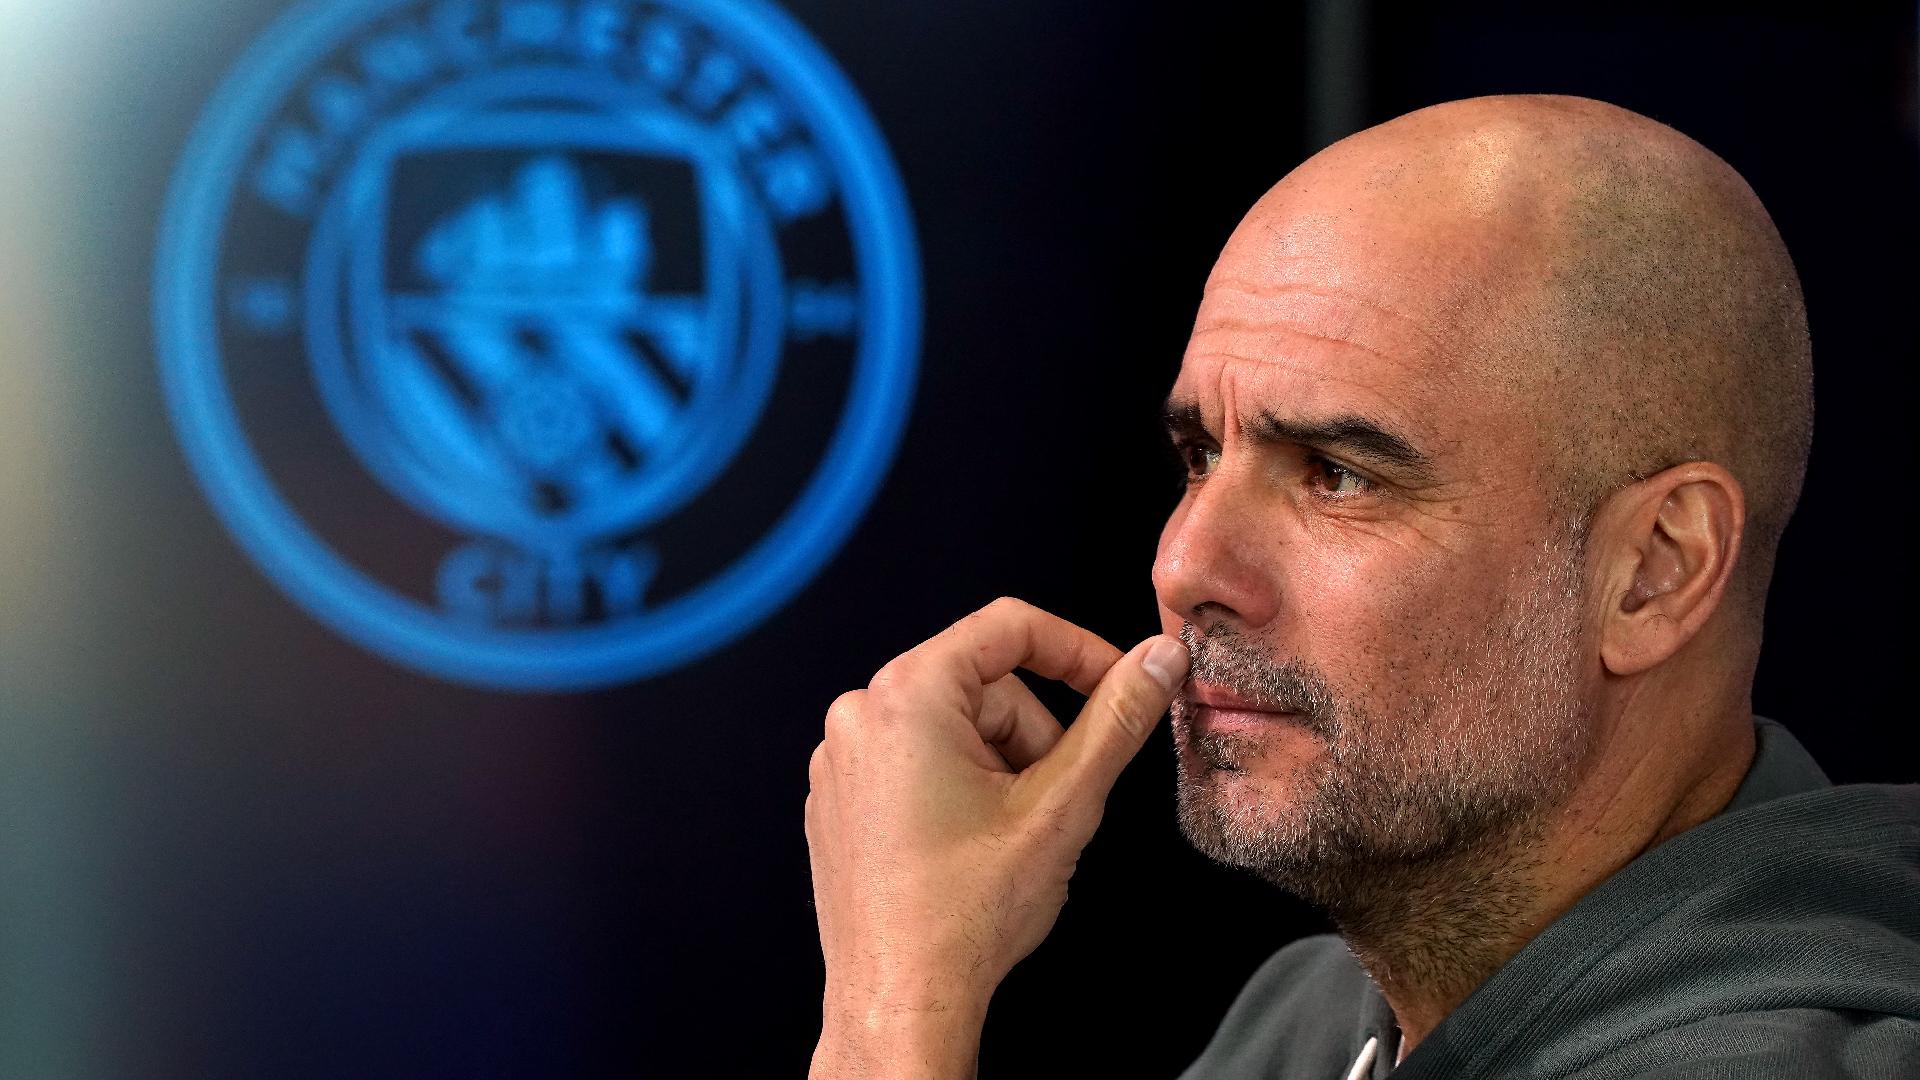 The Champions League is getting better and tougher – Man City boss Pep Guardiola